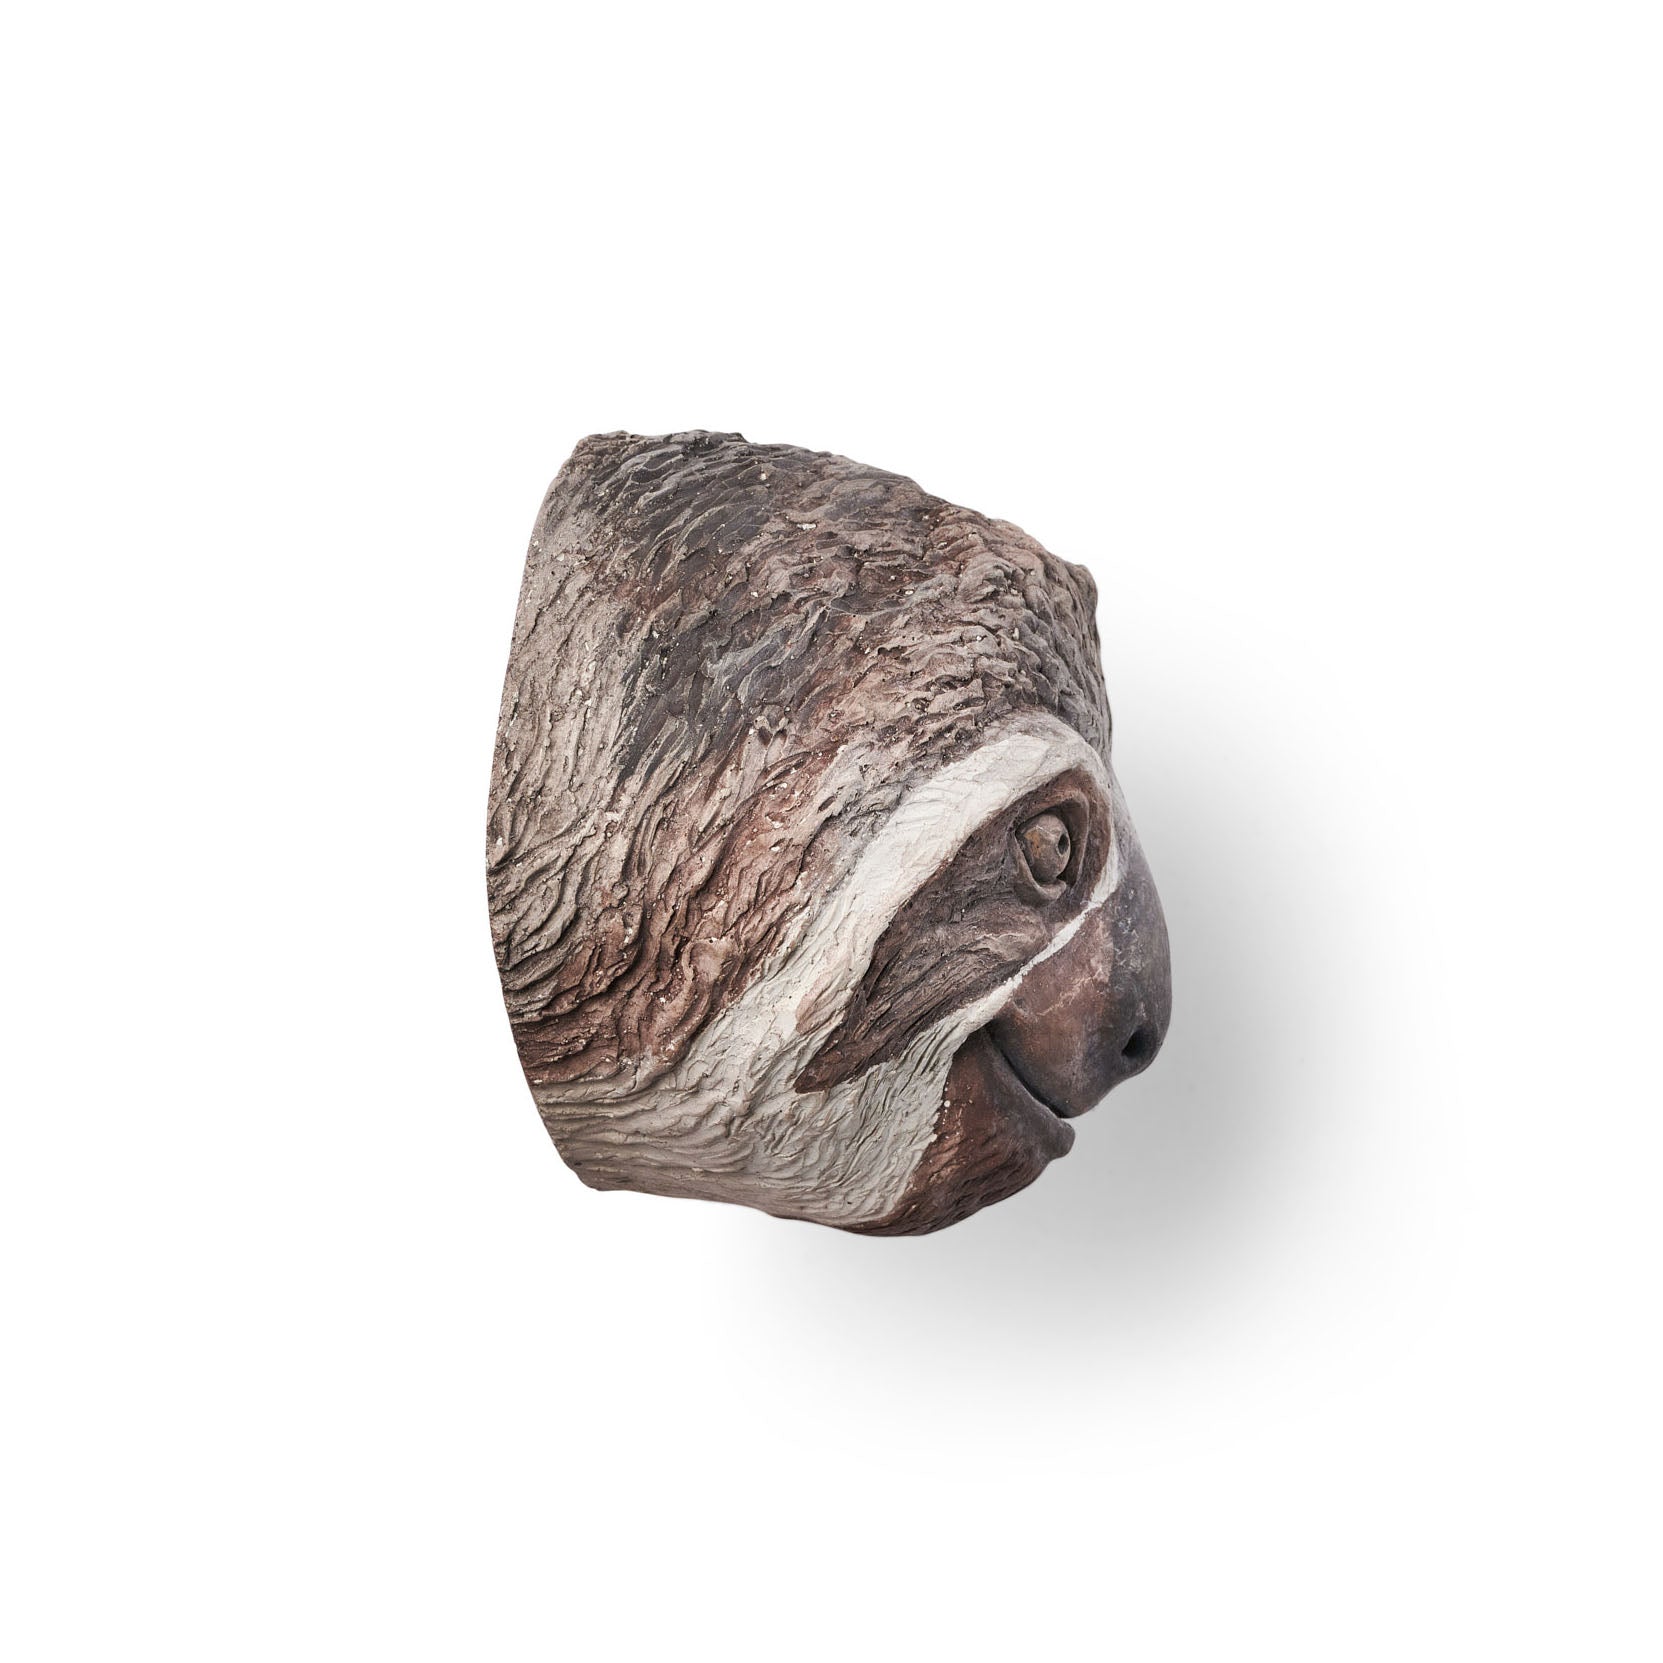 wall-hanging-concrete-sloth-head-side-view